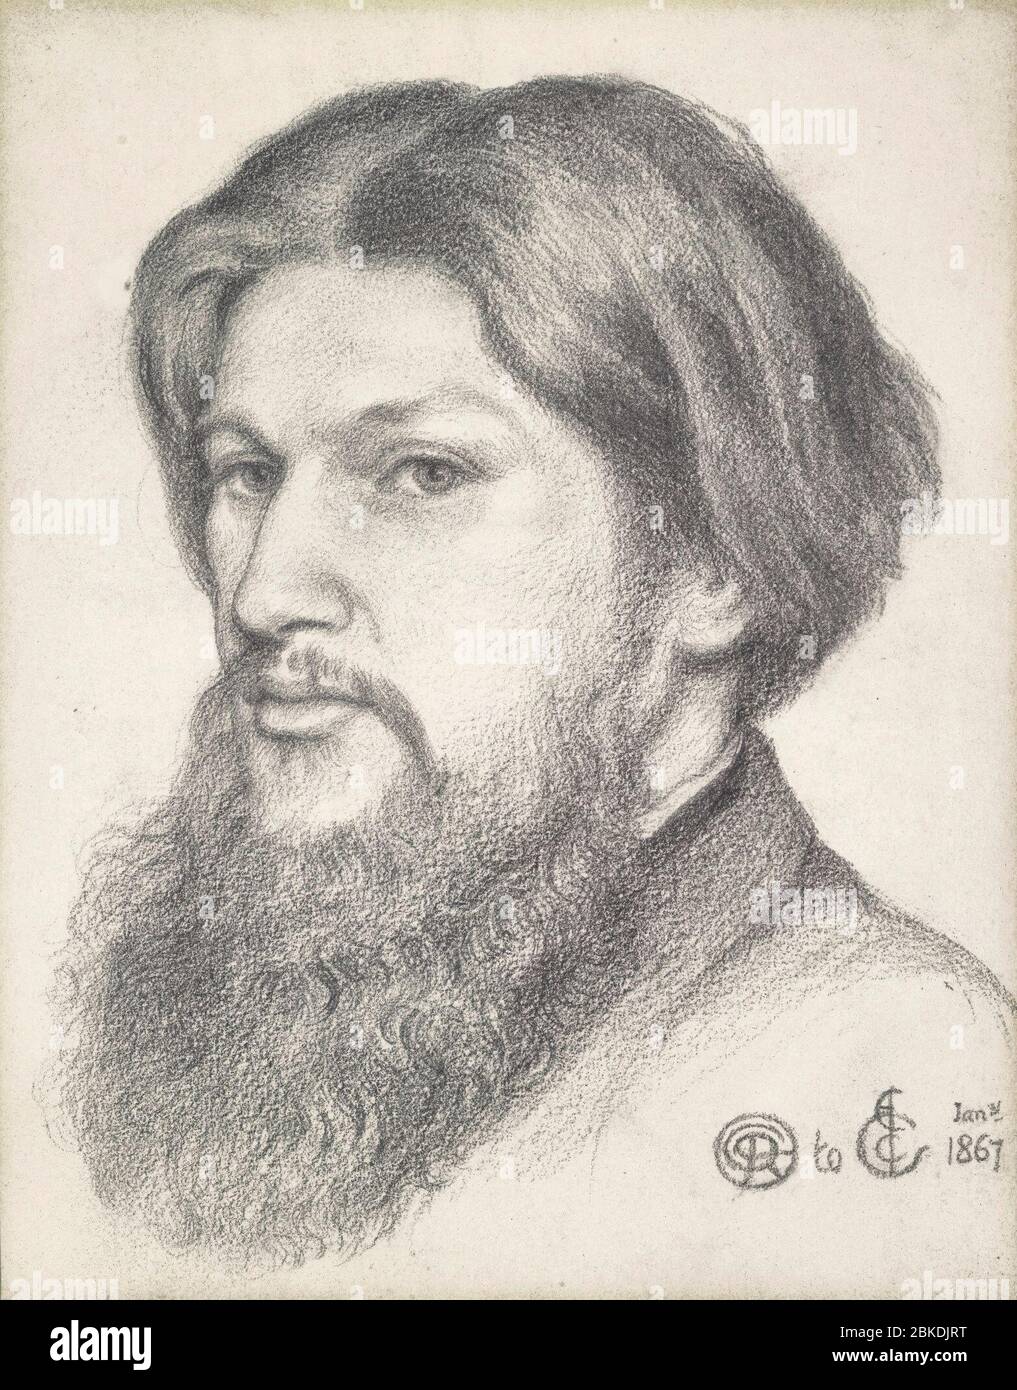 Portrait of Ford Madox Brown - Dante Gabriel Rossetti, 31 January 1867 Stock Photo